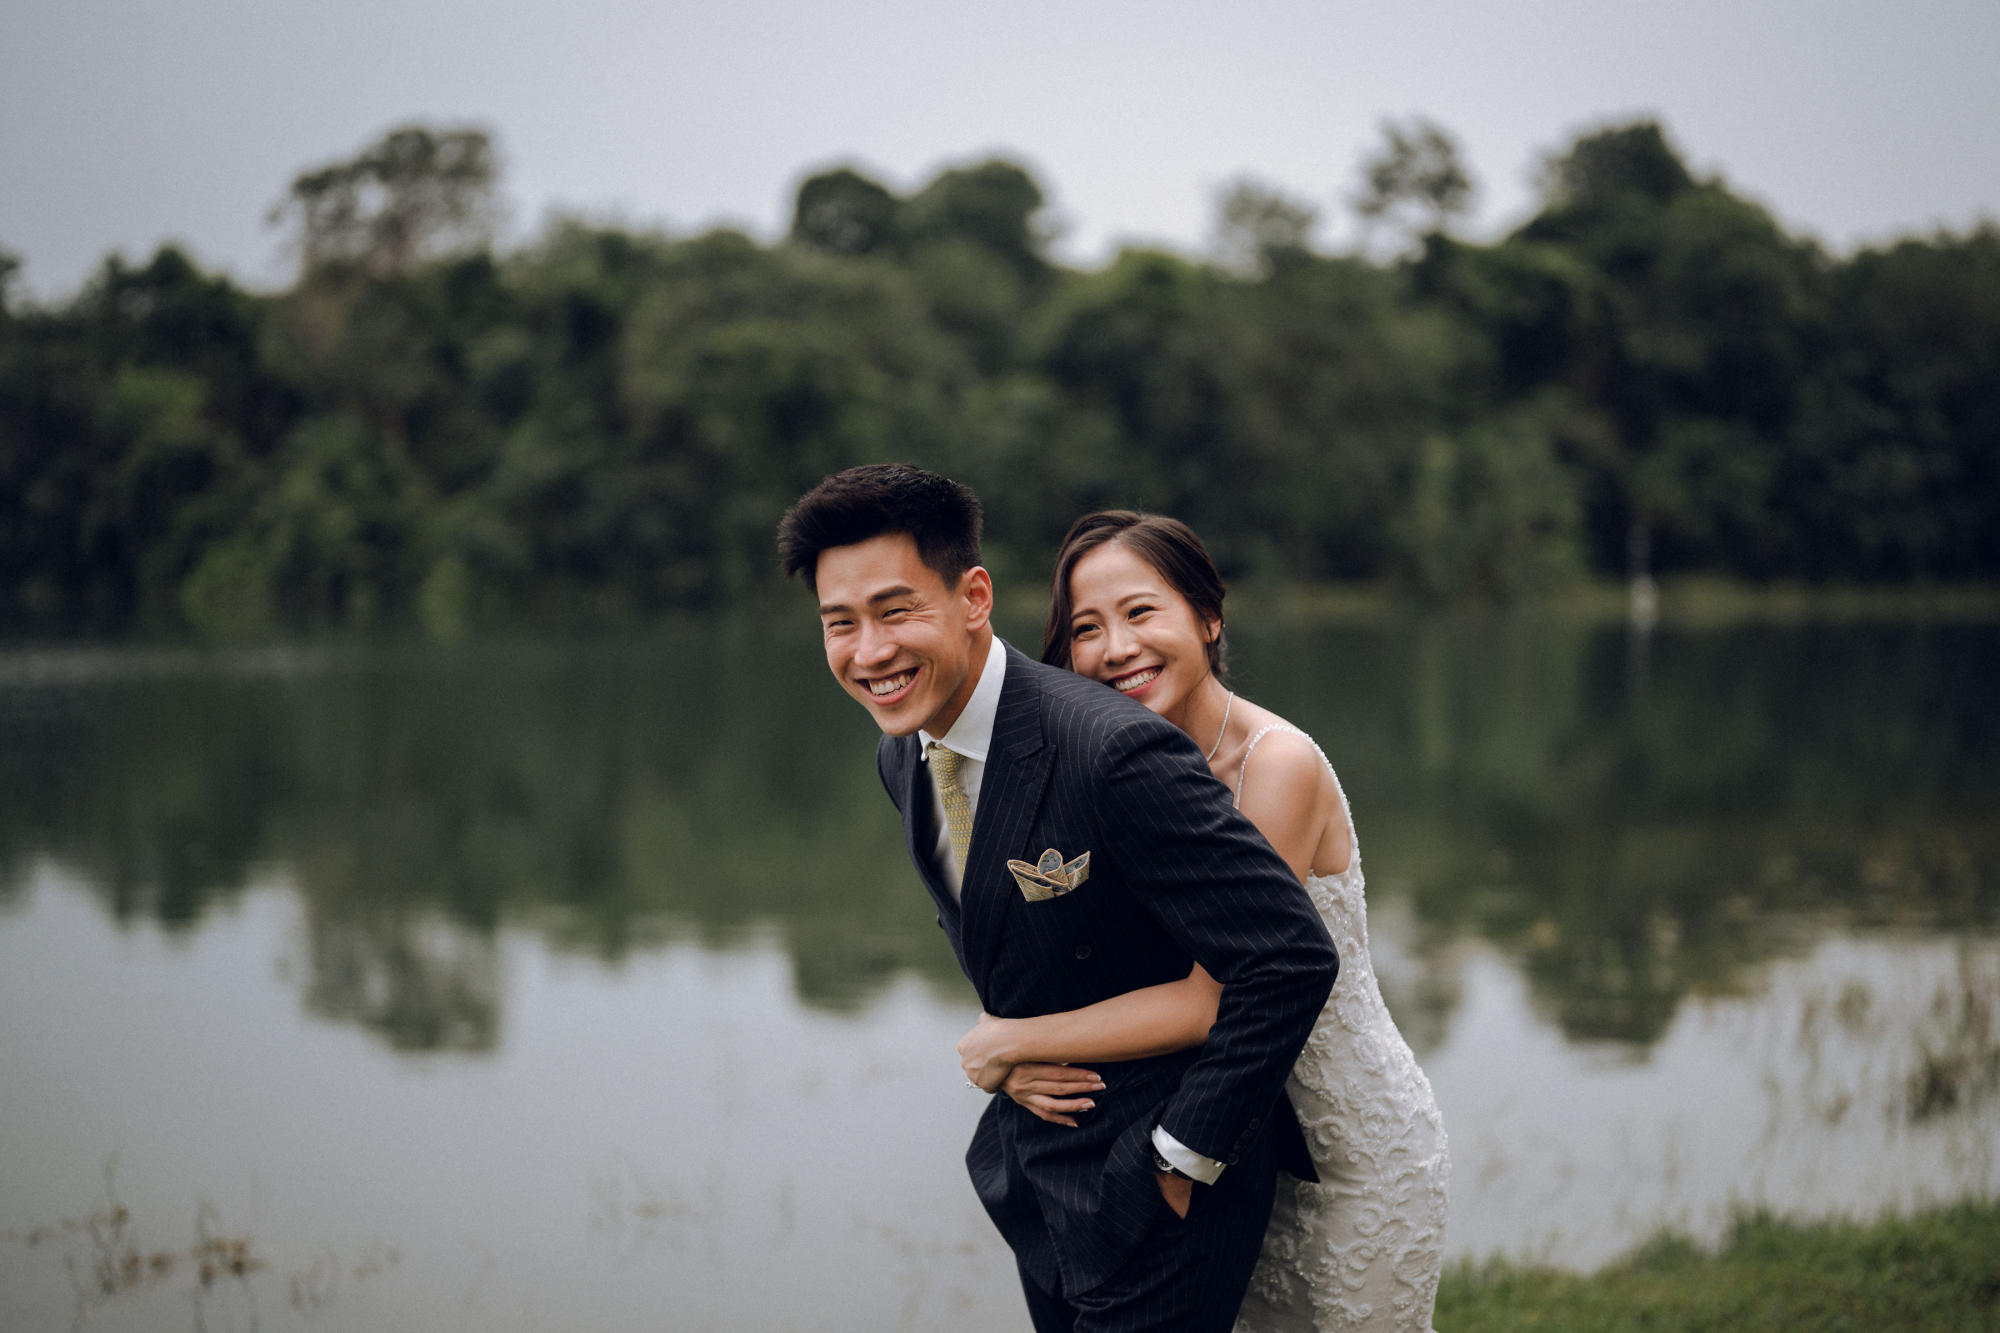 Prewedding Photoshoot At Whisky Library, Gillman Barracks And Lower Peirce Reservoir by Michael on OneThreeOneFour 34